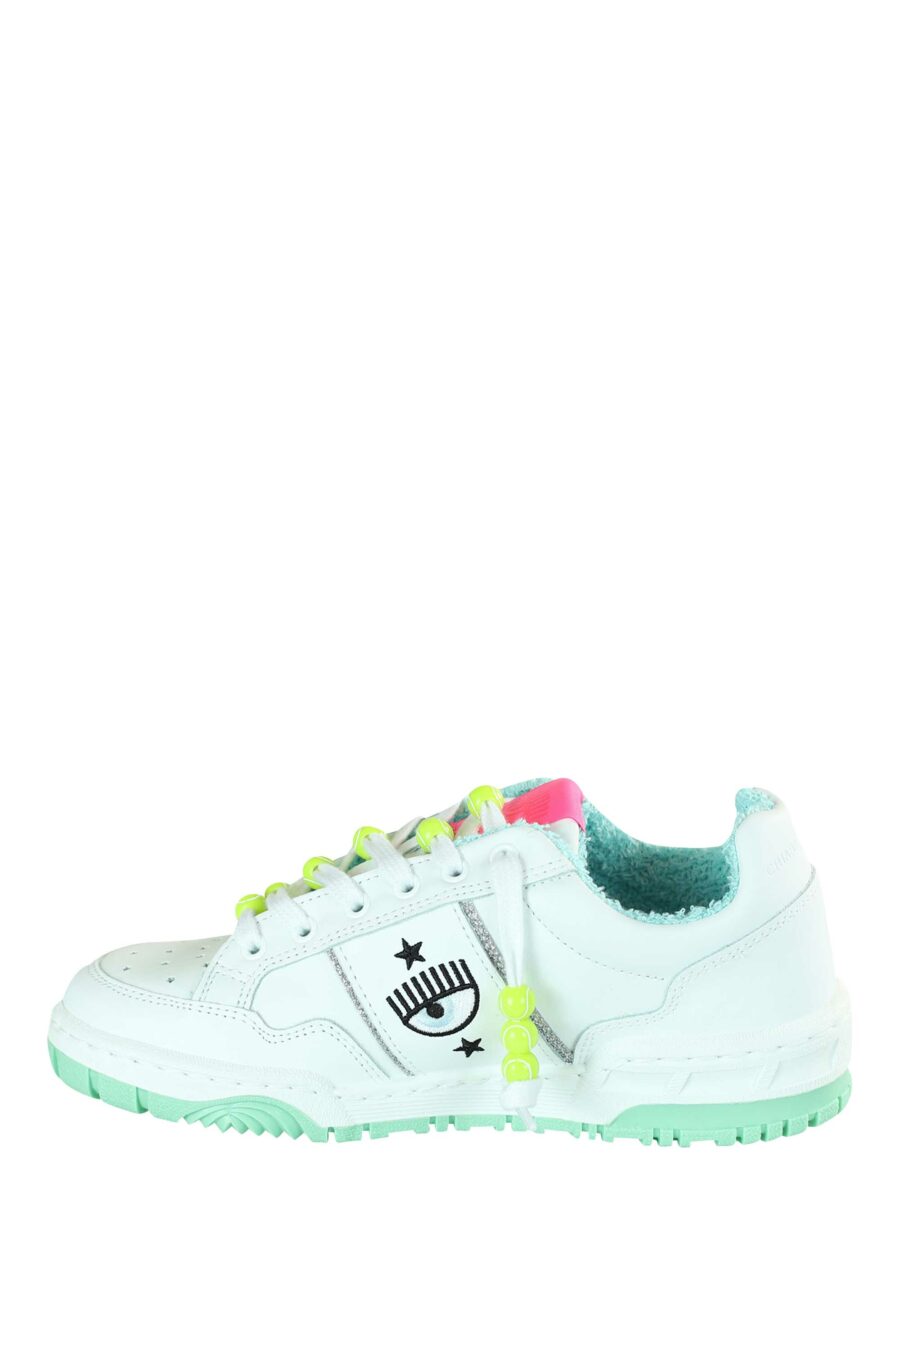 White trainers with eye logo and multicoloured details - 8059388228850 3